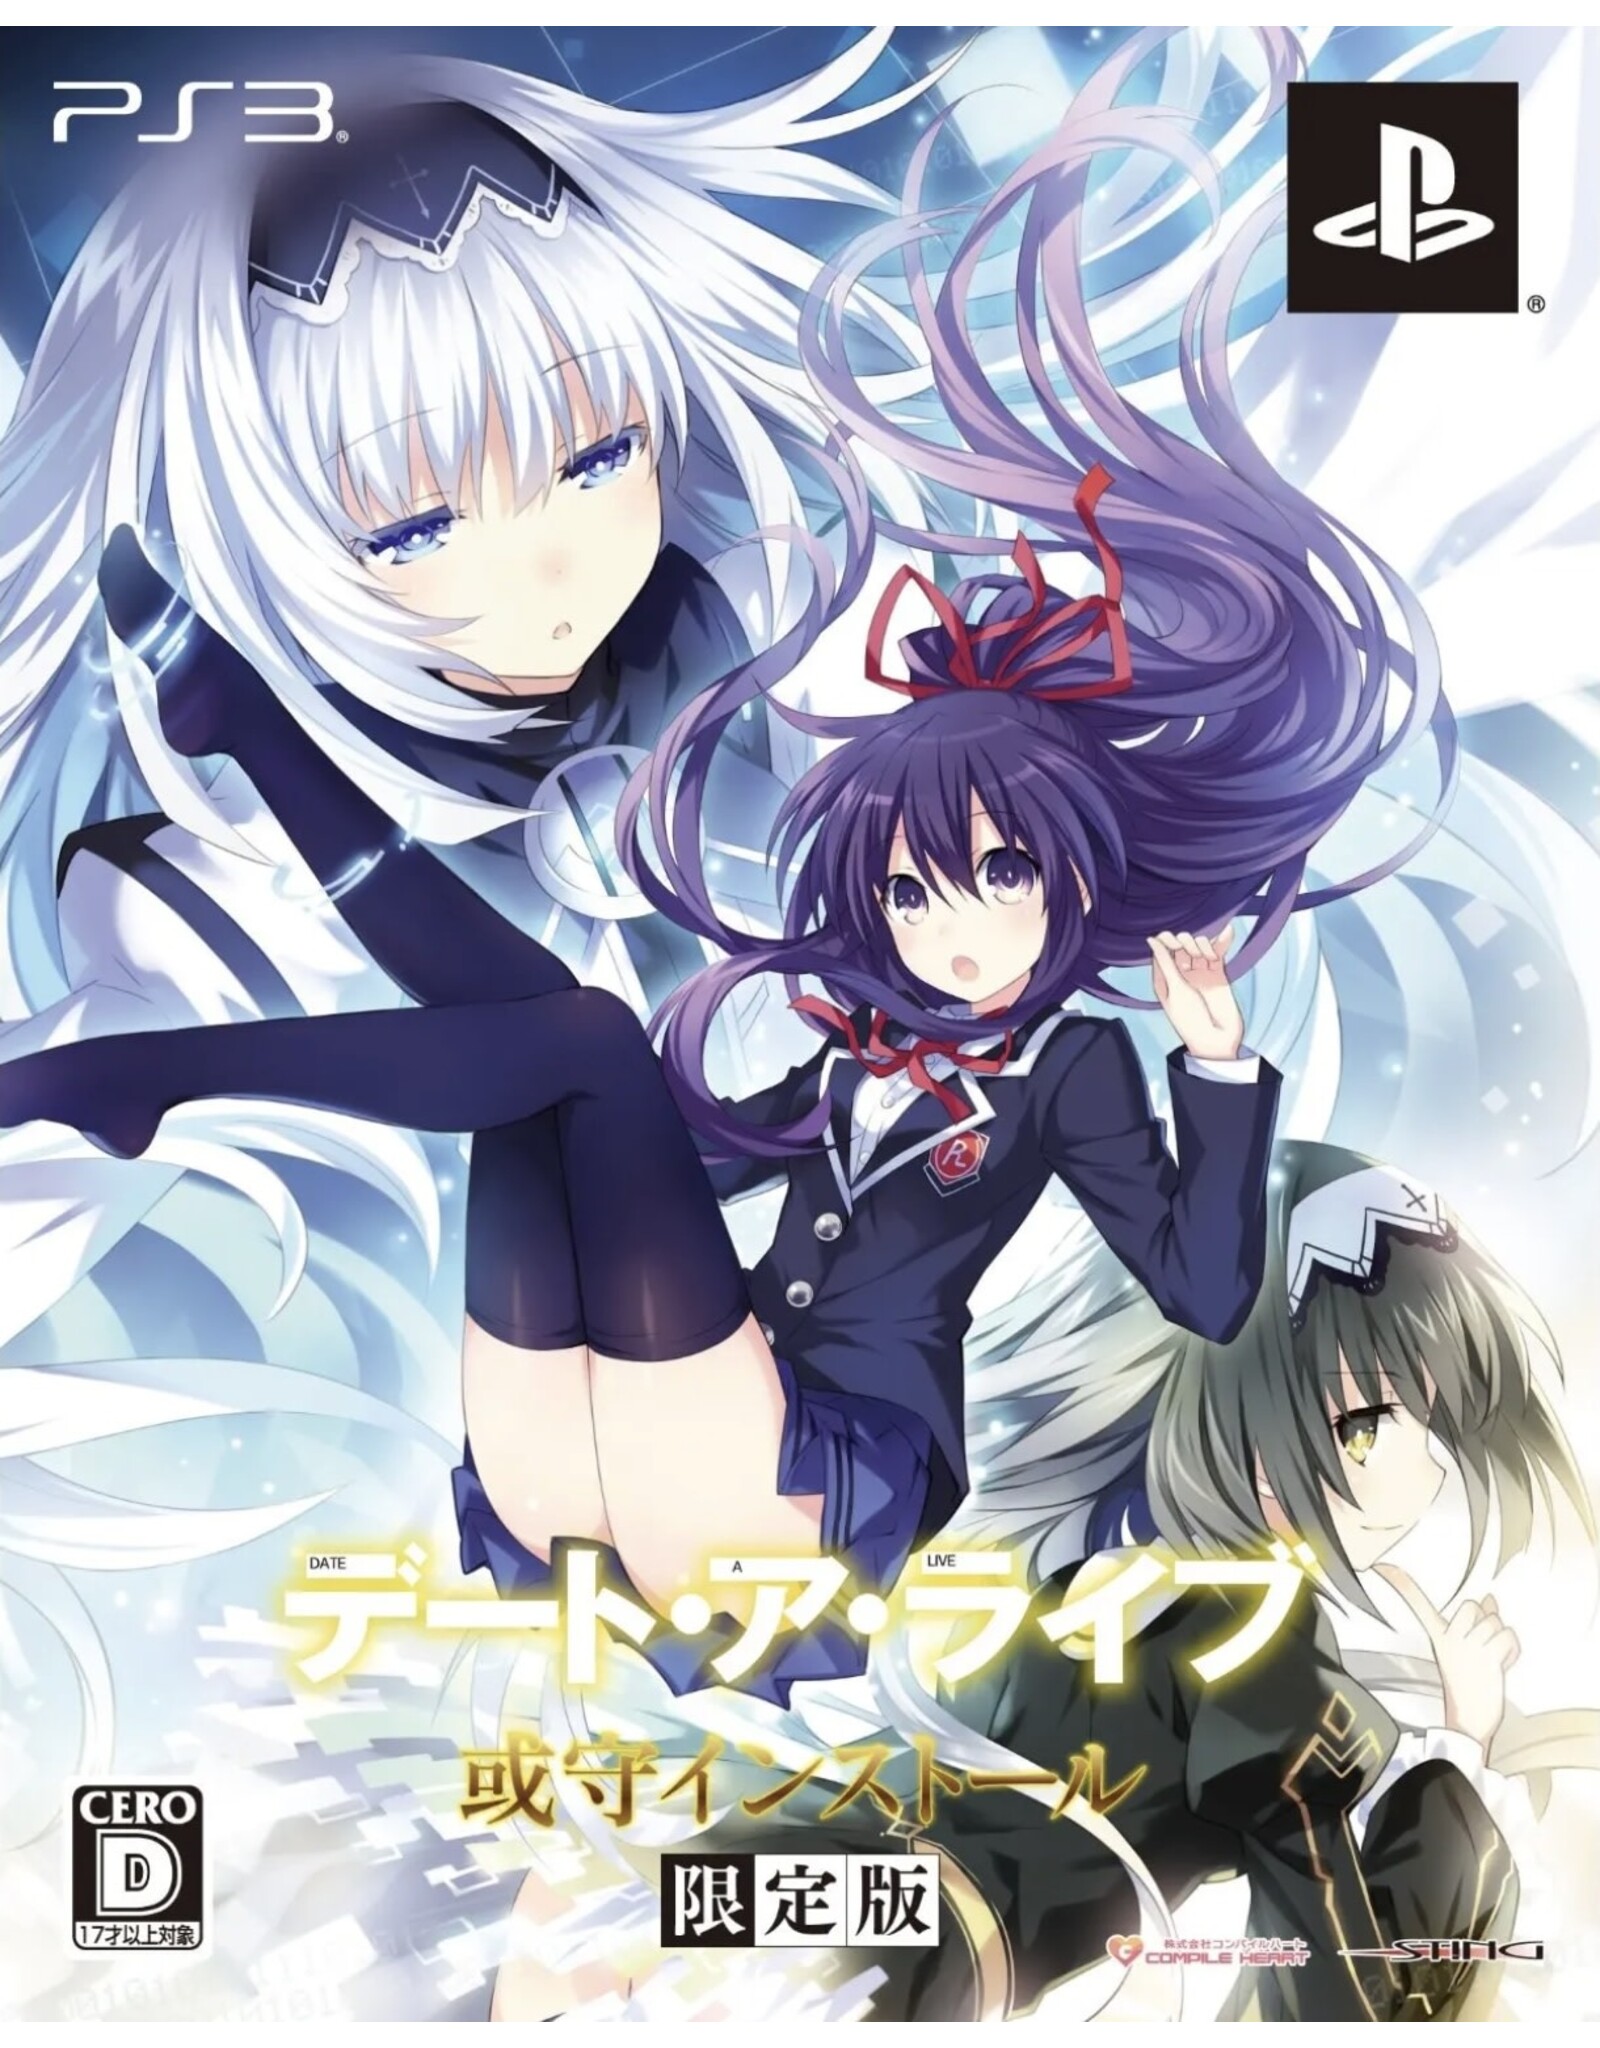 Playstation 3 Date A Live: Arusu Install Limited Edition - JP Import (Used)